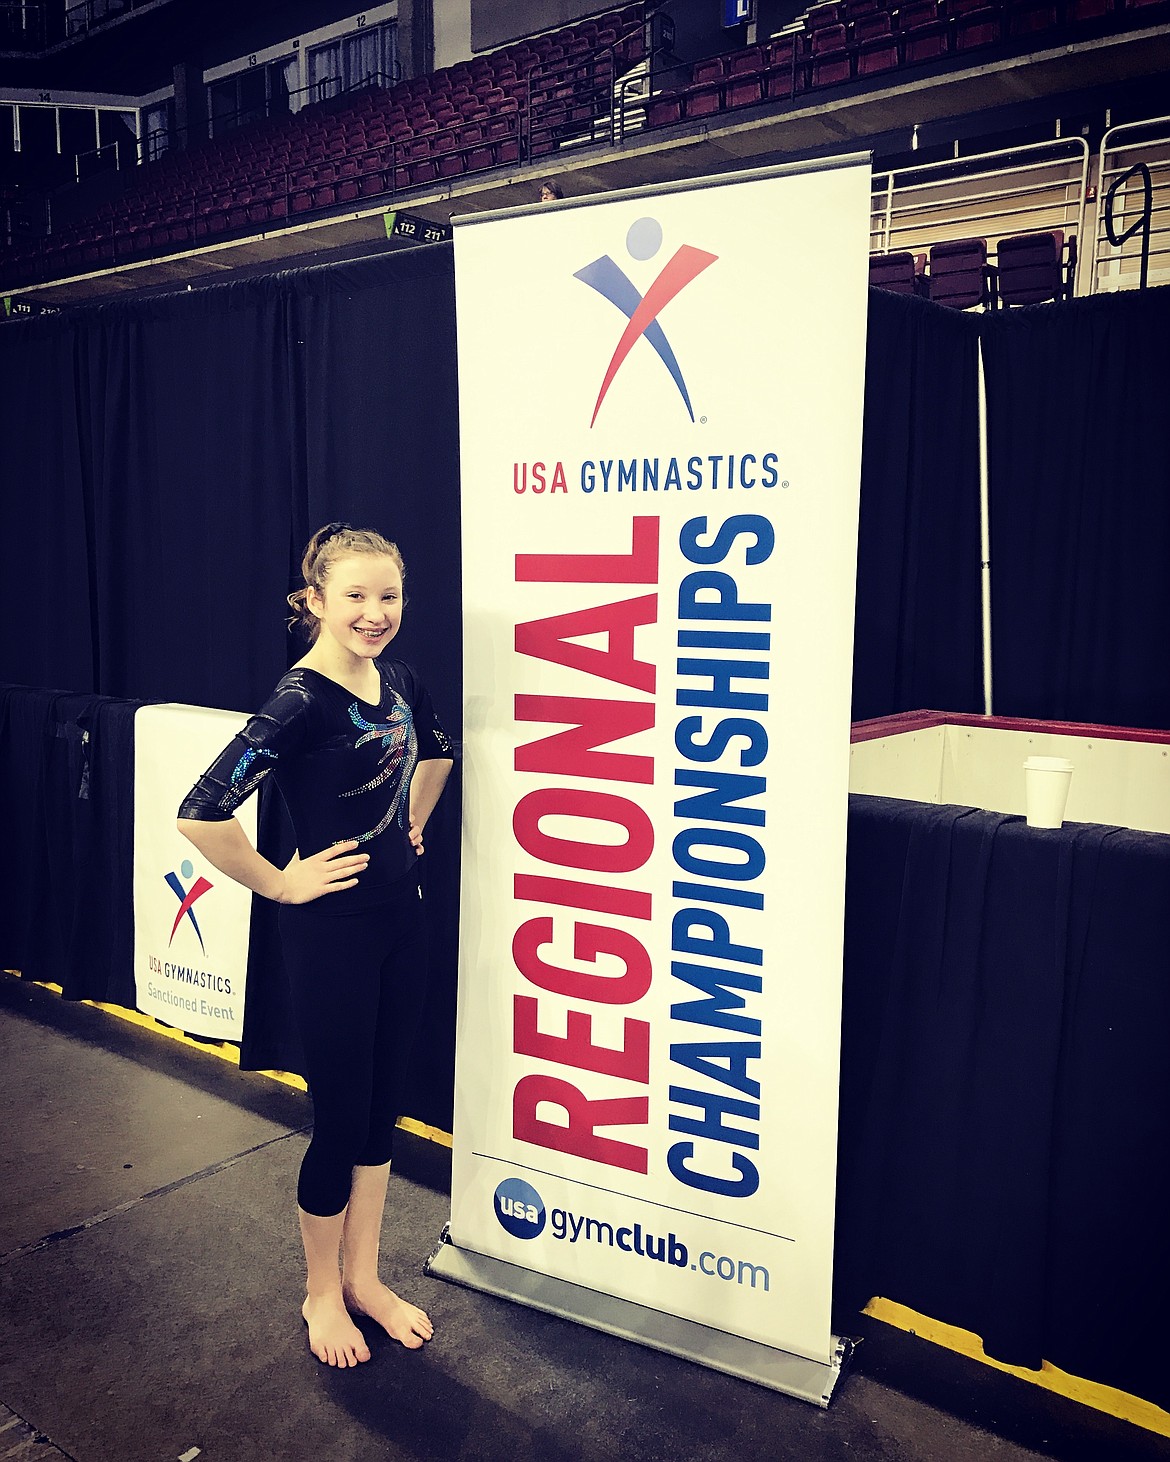 Courtesy photo
Samantha Snow was the only gymnast from Avant Coeur Gymnastics that qualified to the regional gymnastics competition in Boise last weekend. Sam took 6th on Vault with a 9.000 and she took 18th out of 24 Level 8s in the Junior C session.